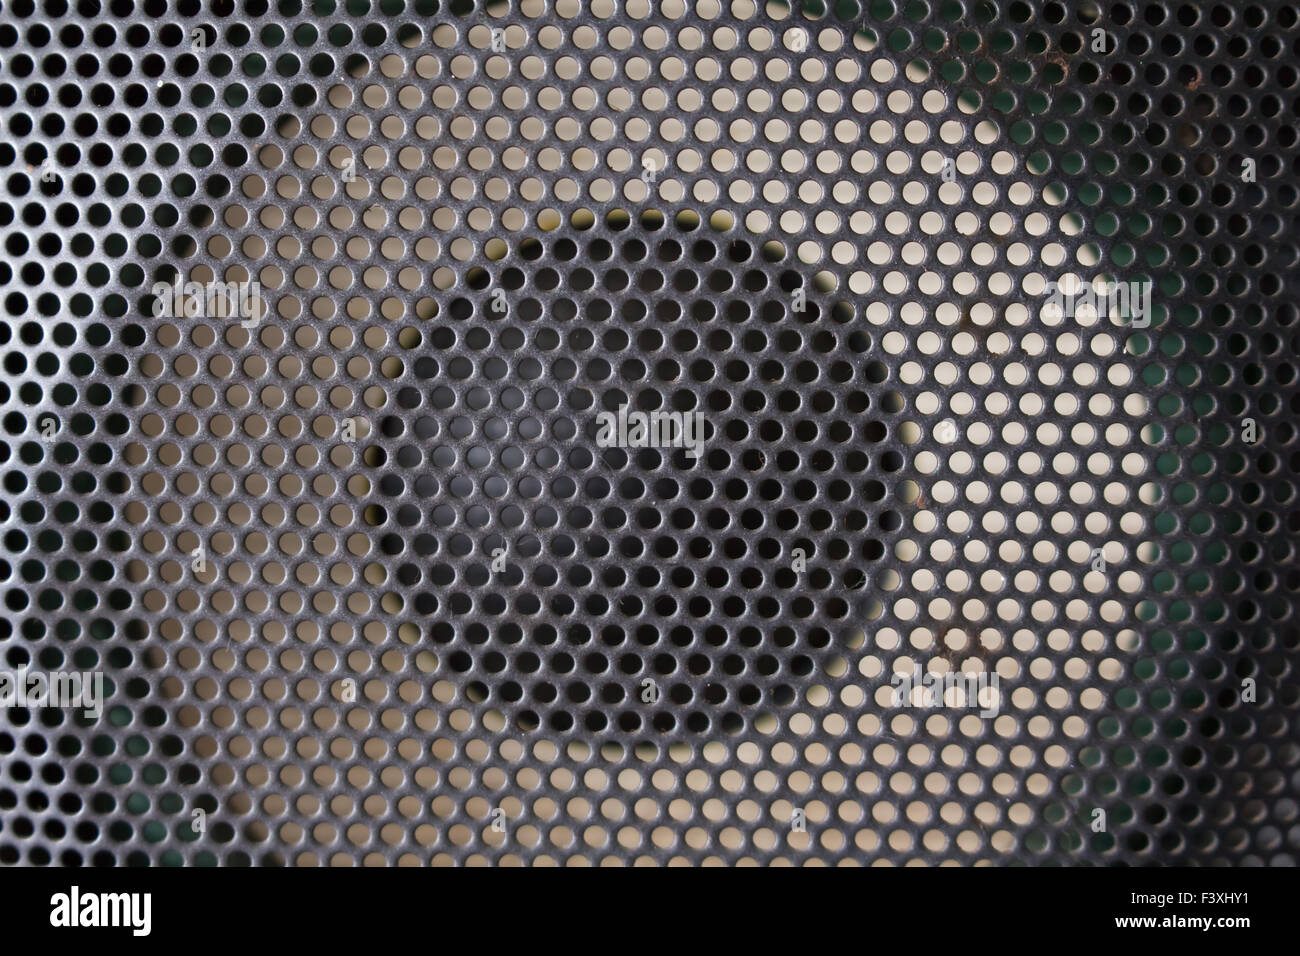 Background consisting of a grid and an audio speaker Stock Photo